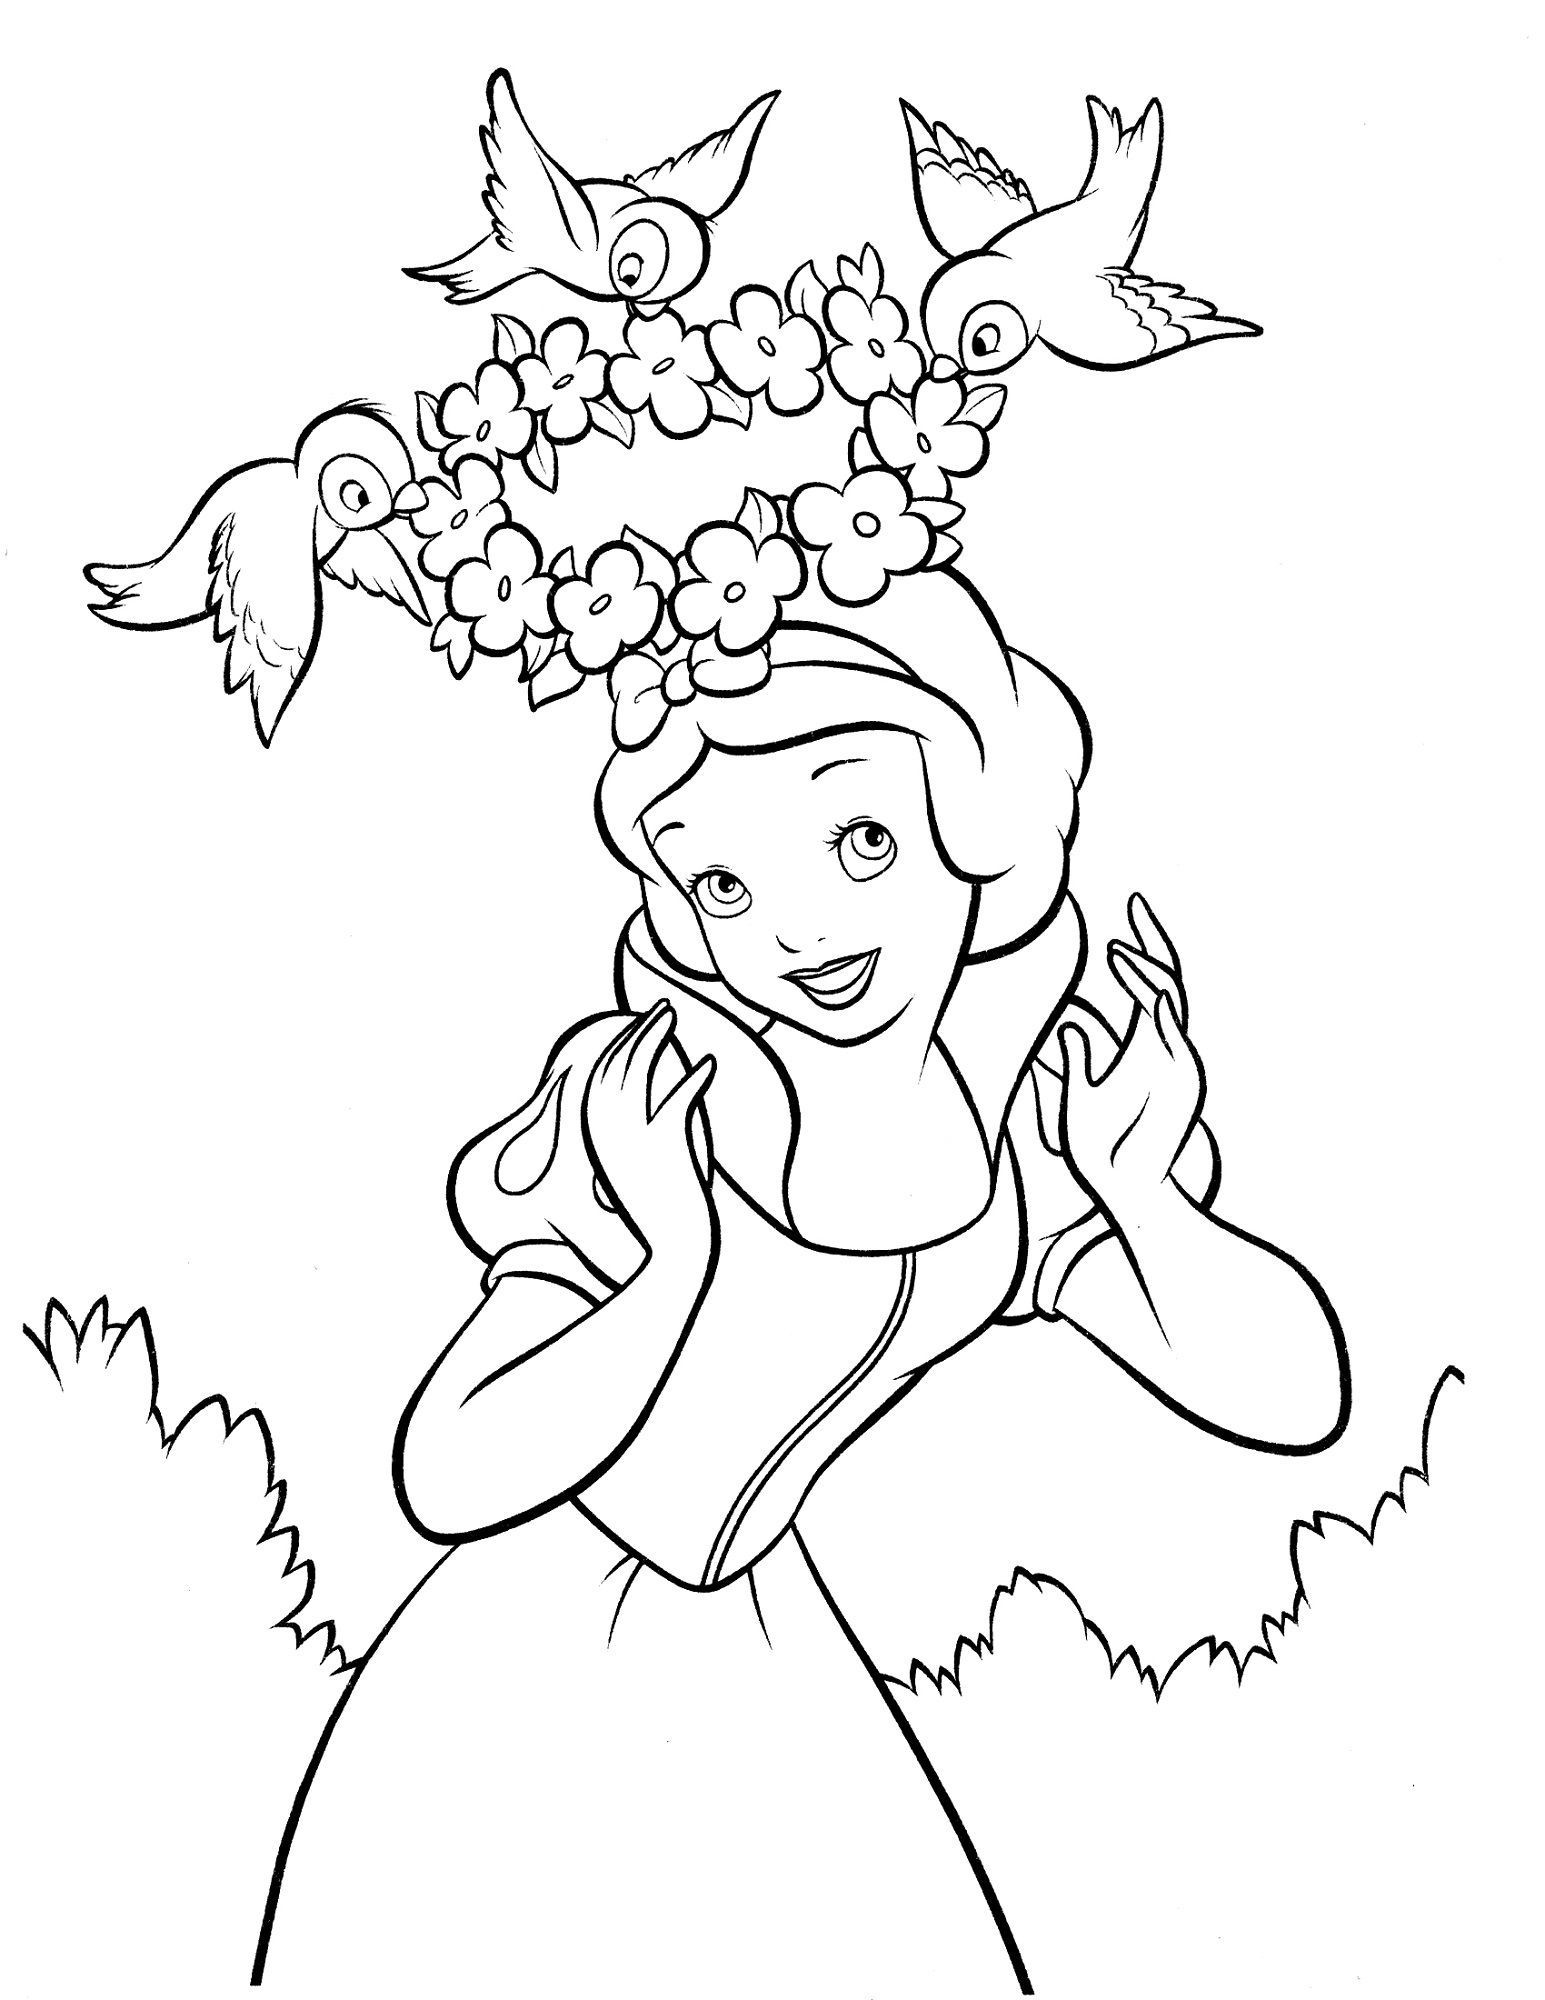 100 Ideas Snow White Coloring Pages Free Emergingartspdx Princess Games